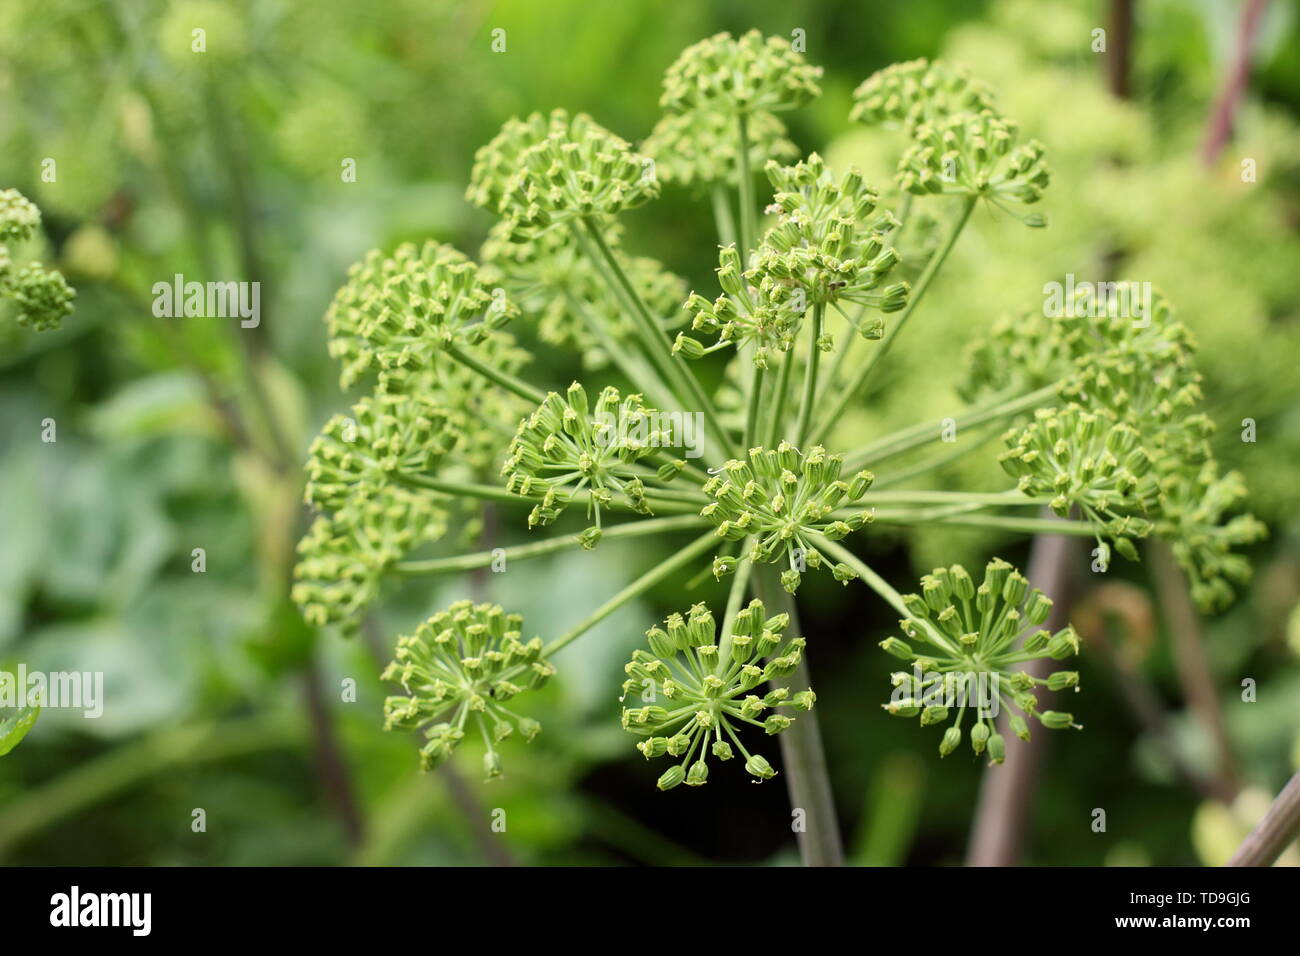 Angelica archangelica. Large flowerheads of this architectural, biennial plant in June Stock Photo